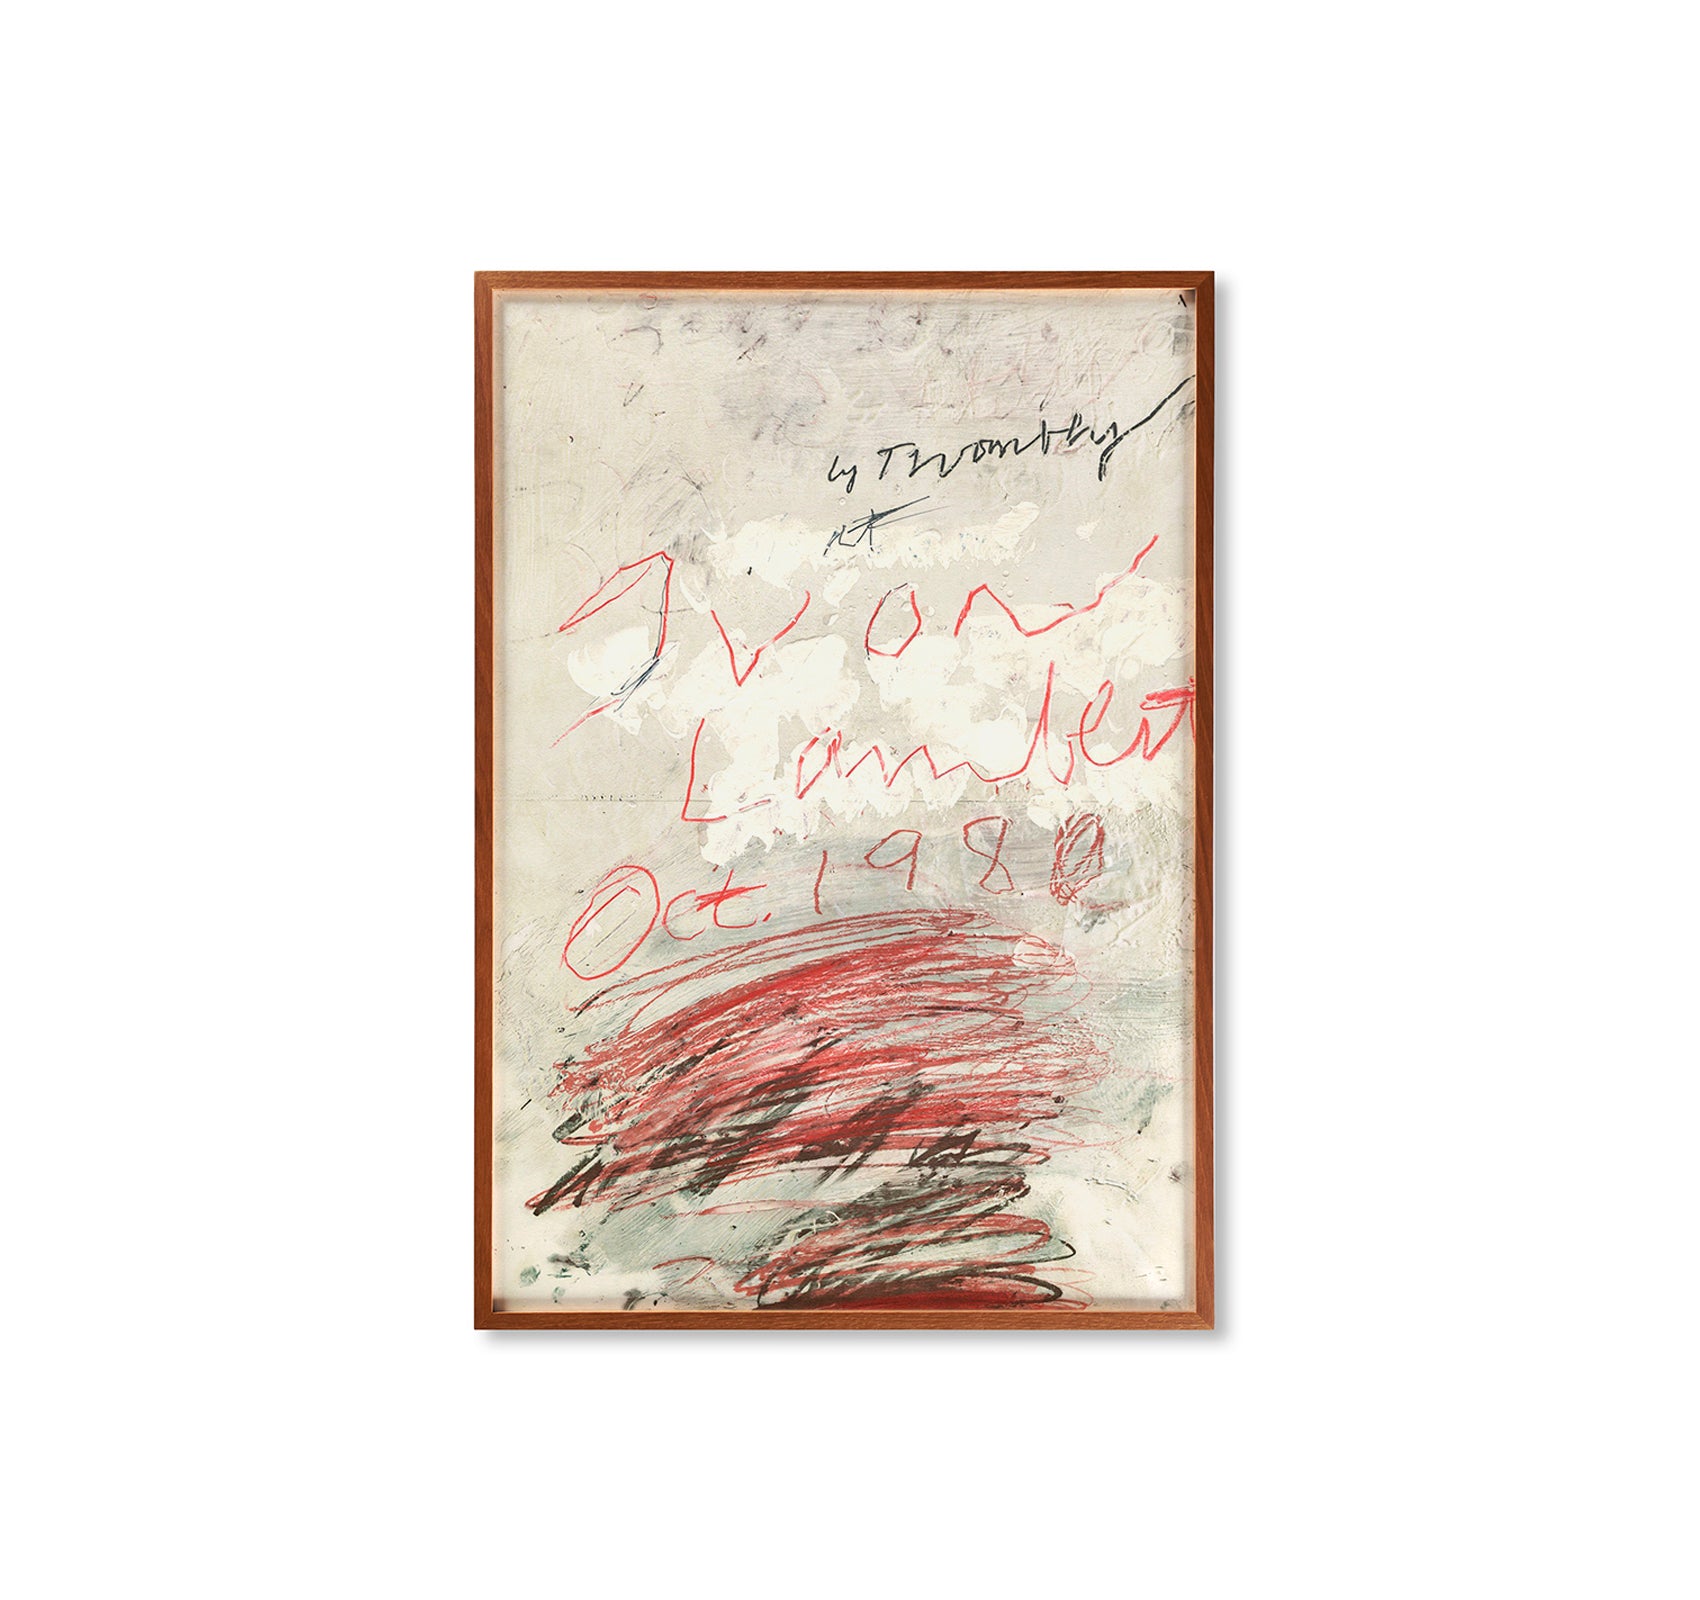 POSTER PROJECT (1980) by Cy Twombly – twelvebooks